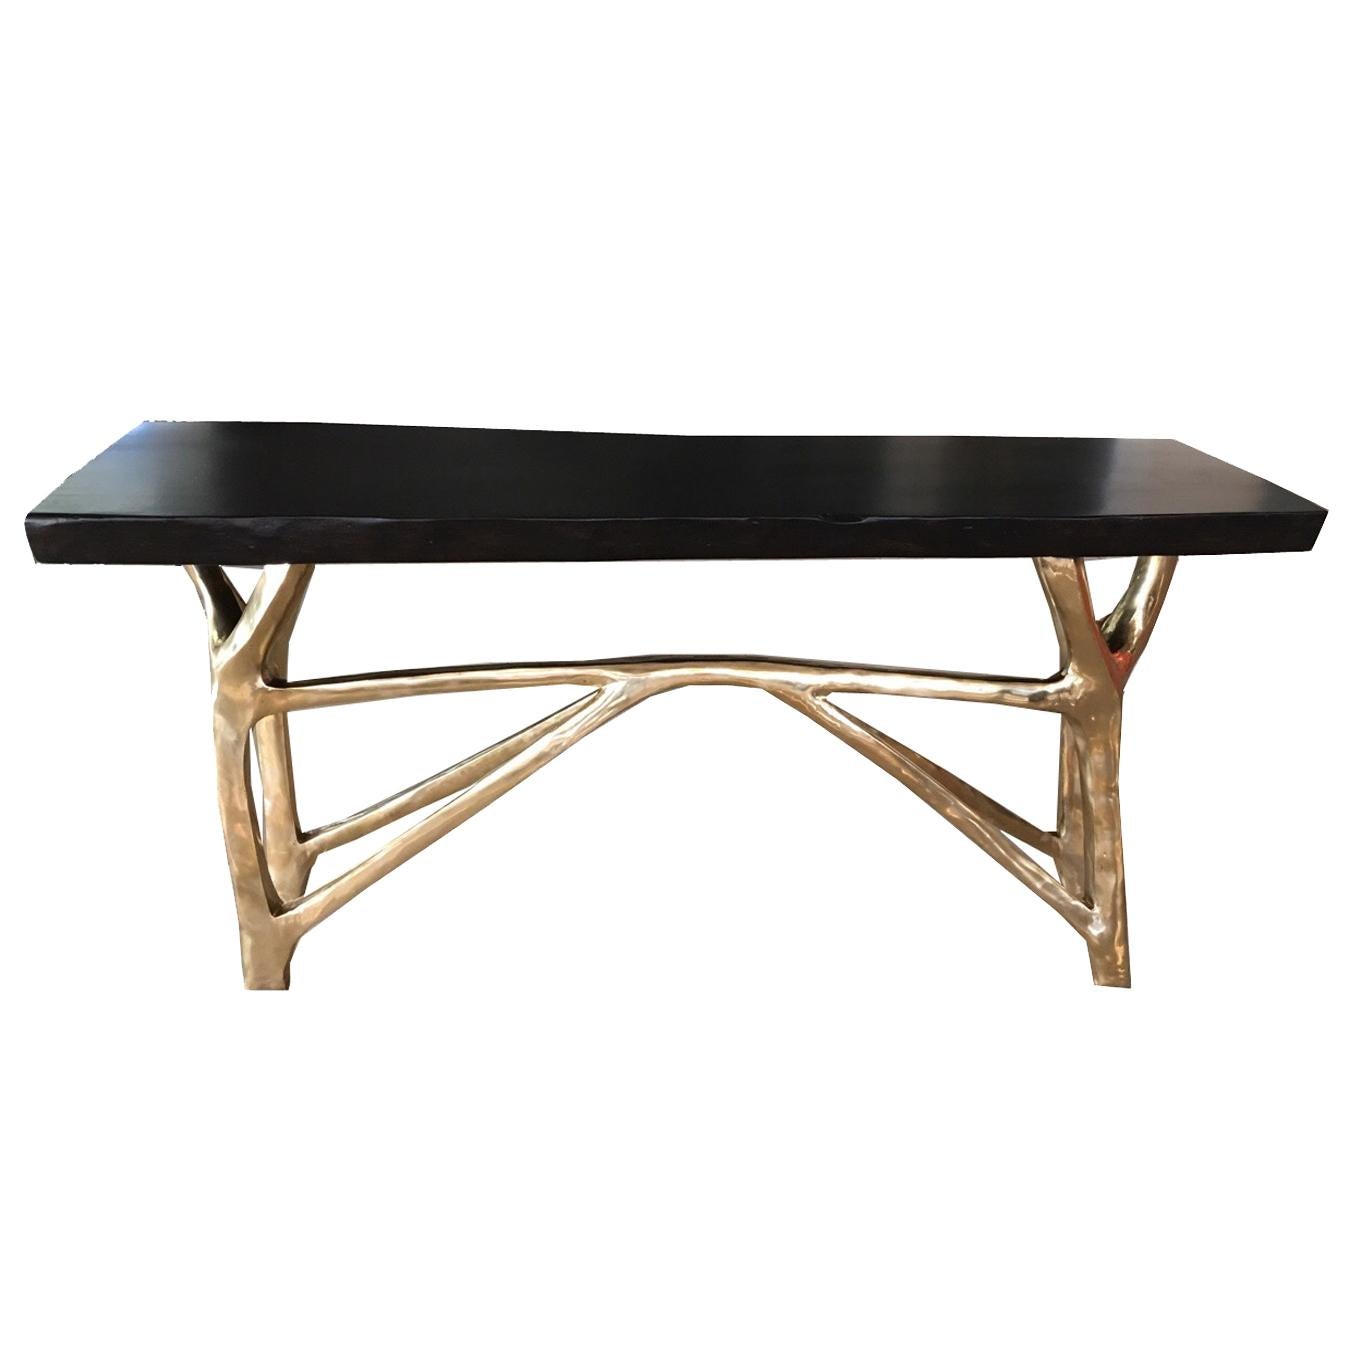 Console with cast bronze base and live edge exotic hardwood or black walnut top.